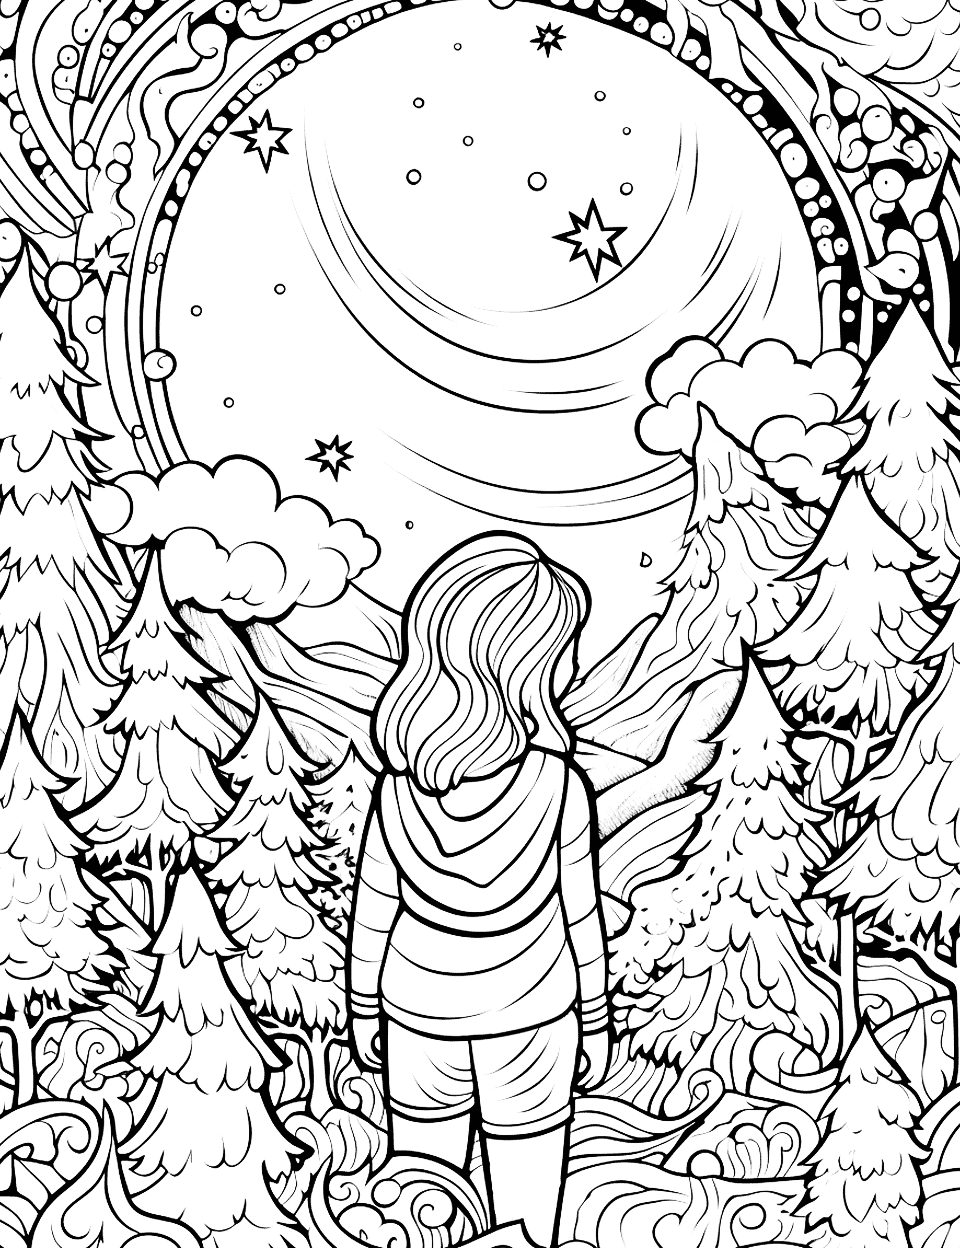 Galaxy Forest Adventure Adult Coloring Page - A forest adventure with a galaxy twist.